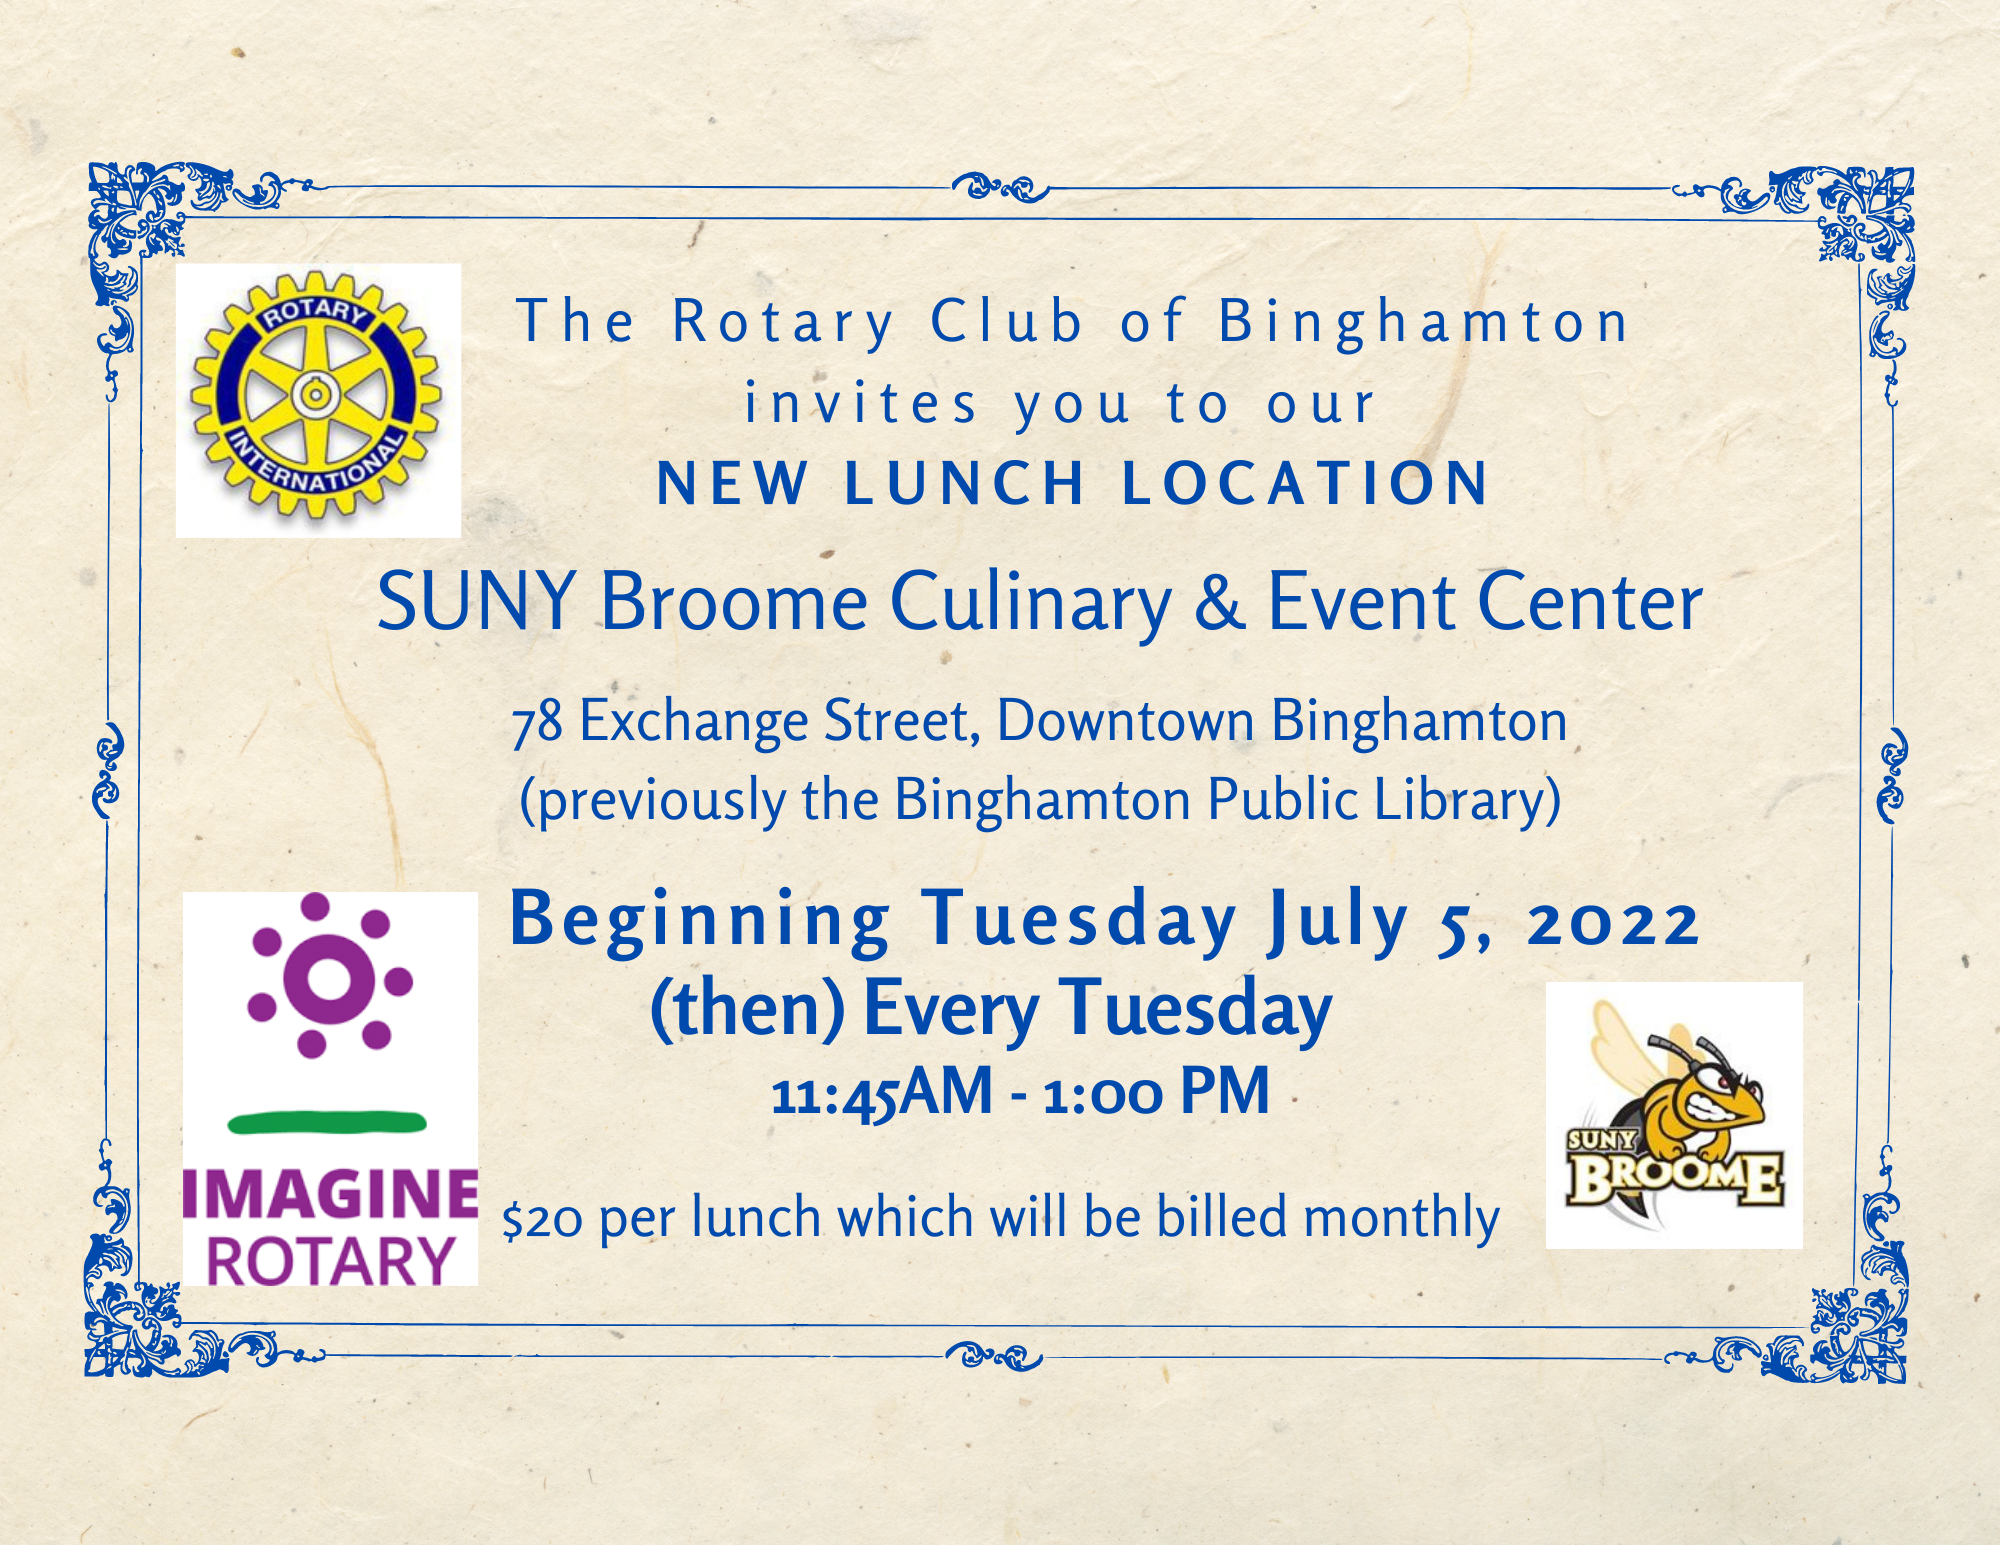 2022 Rotary New Lunch Location Invite